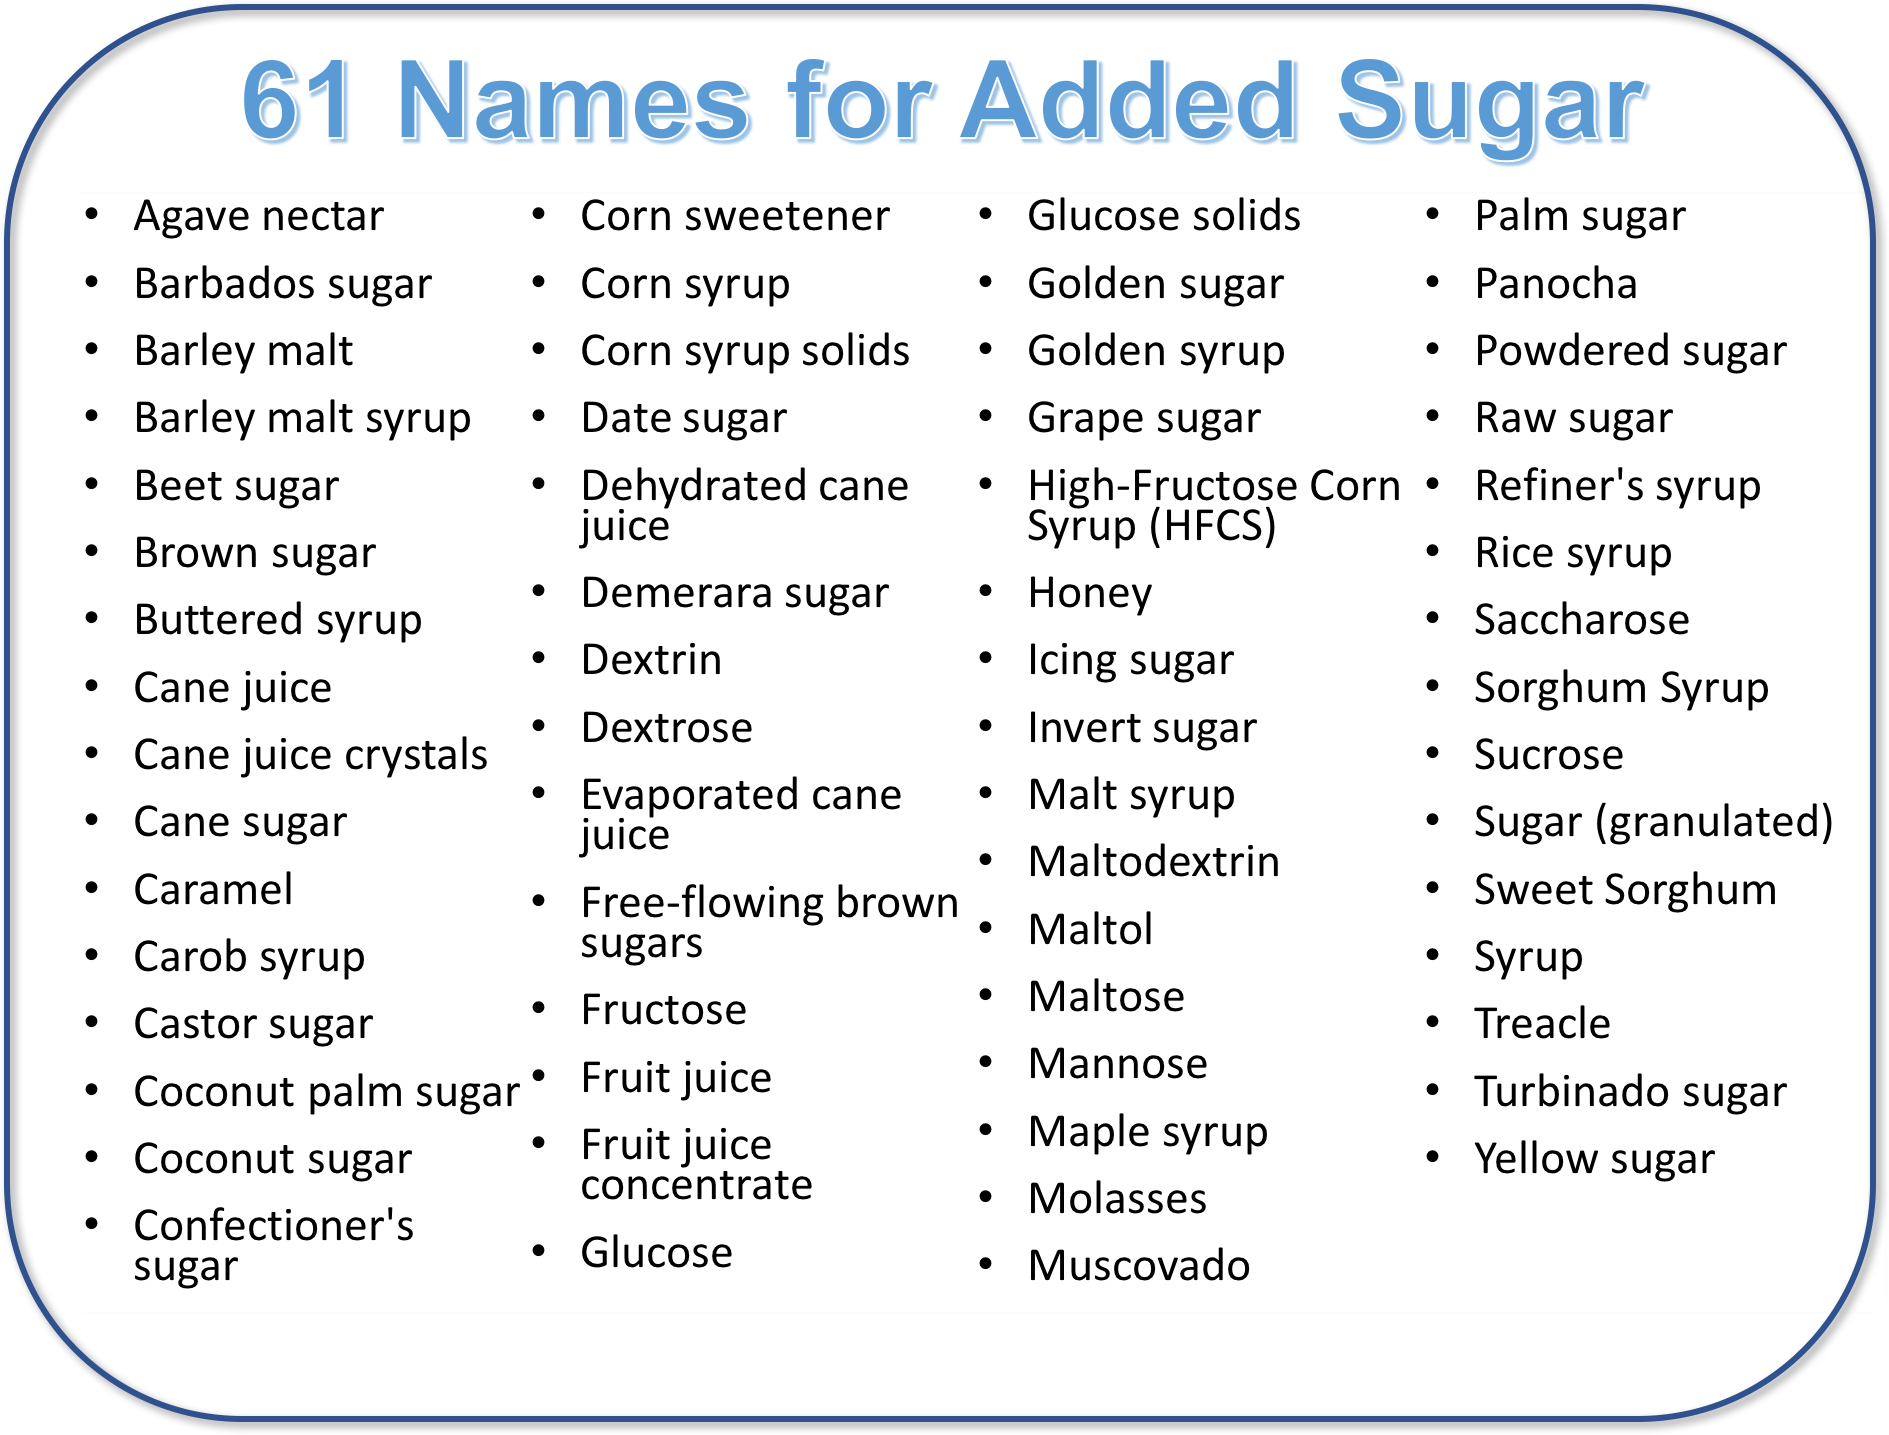 This figure lists 61 different names for sugar that might show up on an ingredient list: agave nectar, barbados sugar, barley malt, barley malt syrup, beet sugar, buttered syrup, cane juice, cane juice crystals, cane sugar, caramel, carob syrup, castor sugar, coconut palm sugar, coconut sugar, confectioner's sugar, corn sweetener, corn syrup, corn syrup solids, date sugar, dehydrated cane juice, demerara sugar, dextrin, dextrose, evaporated cane juice, free-flowing brown sugars, fructose, fruit juice, fruit juice concentrate, glucose, glucose solids, golden sugar, golden syrup, grape sugar, high-fructose corn syrup, honey, icing sugar, invert sugar, malt syrup, maltodextrin, malitol, maltose, mannose, maple syrup, molasses, muscovado, palm sugar, panocha, powdered sugar, raw sugar, refiner's syrup, rice syrup, saccharose, sorghum syrup, sucrose, sugar (granulated), sweet sorghum, syrup, treacle, turbinado sugar, yellow sugar.